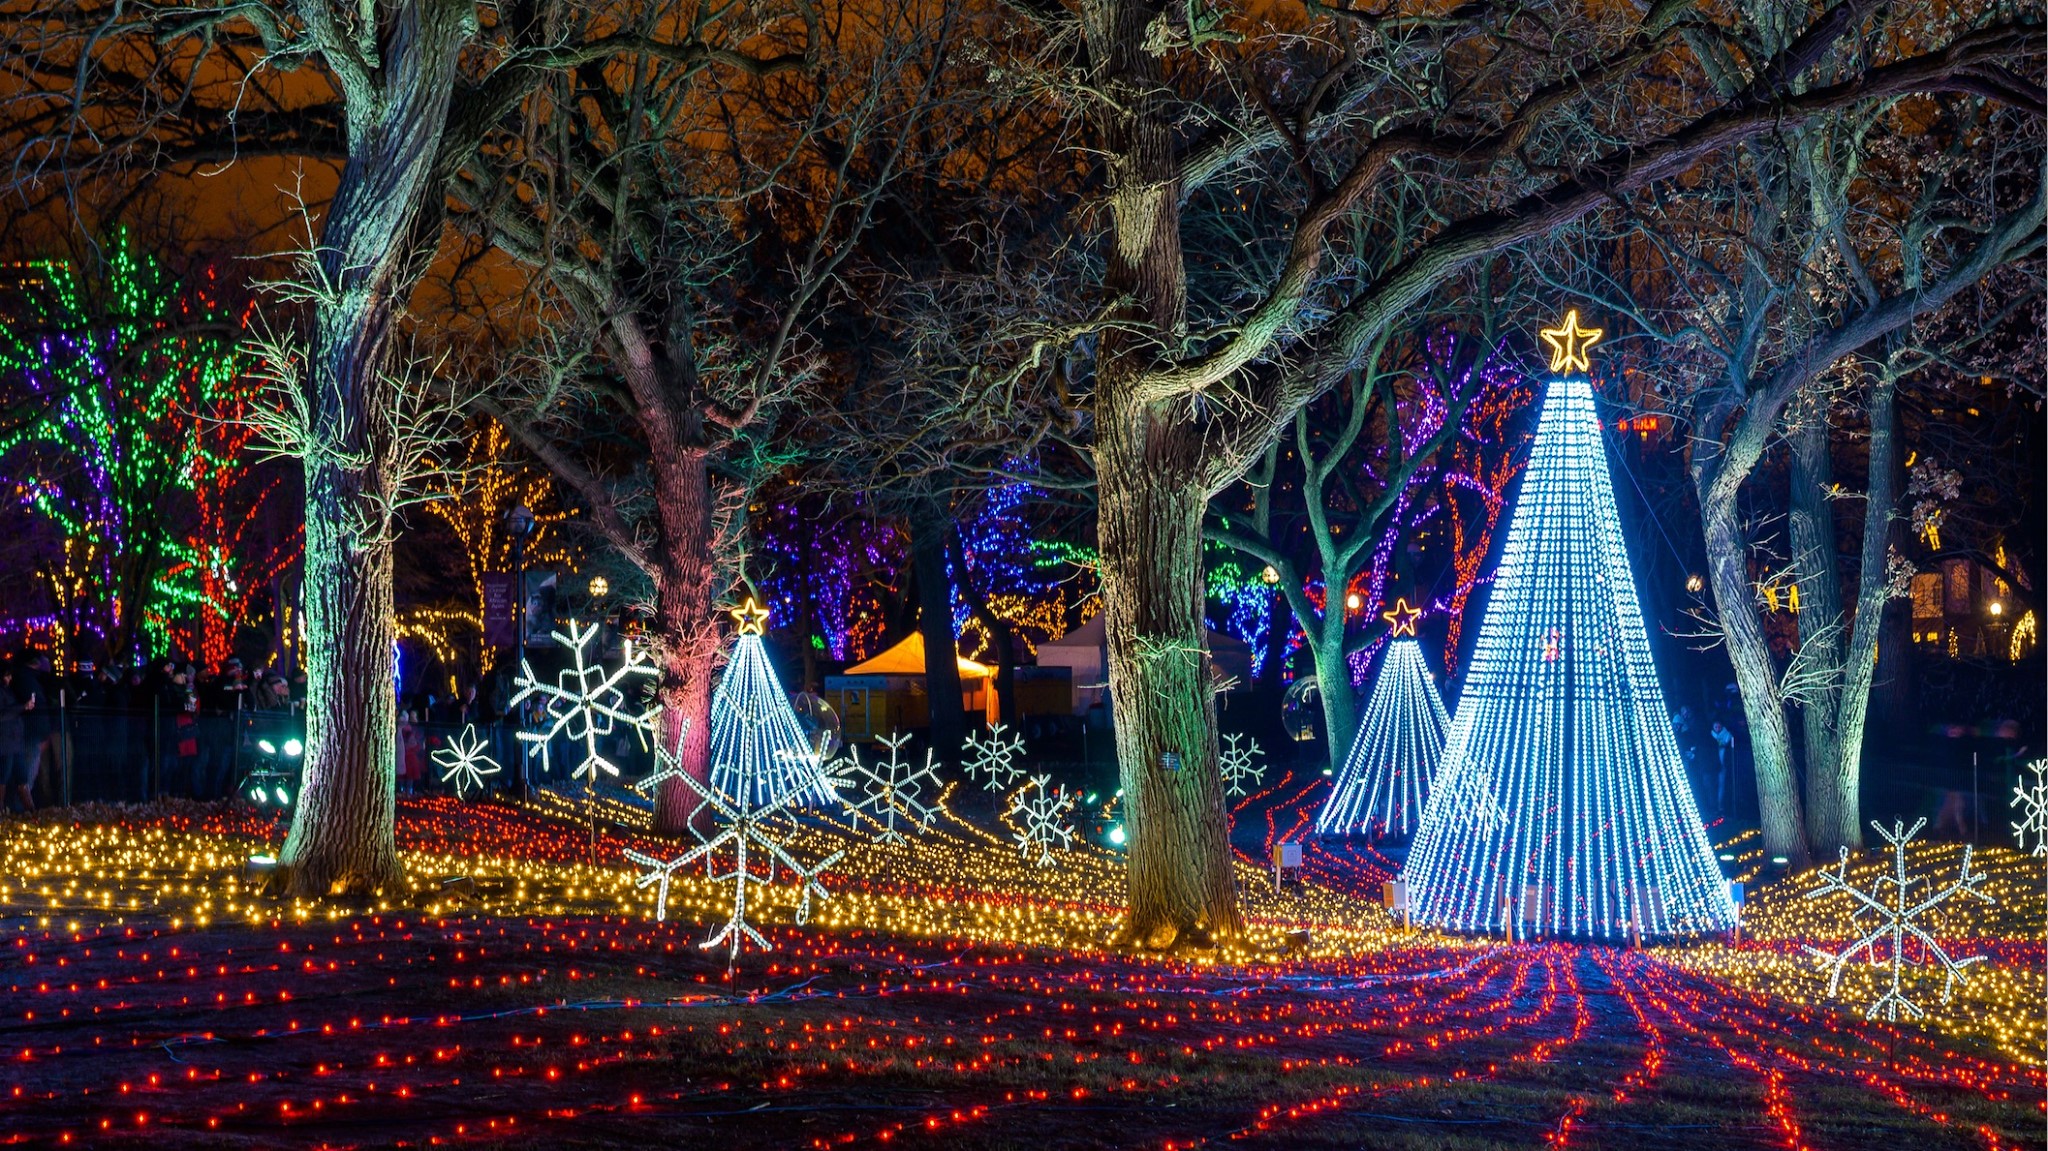 ZooLights at Lincoln Park Zoo is back this year with lots of festive holiday activities. Photo courtesy Lincoln Park Zoo.